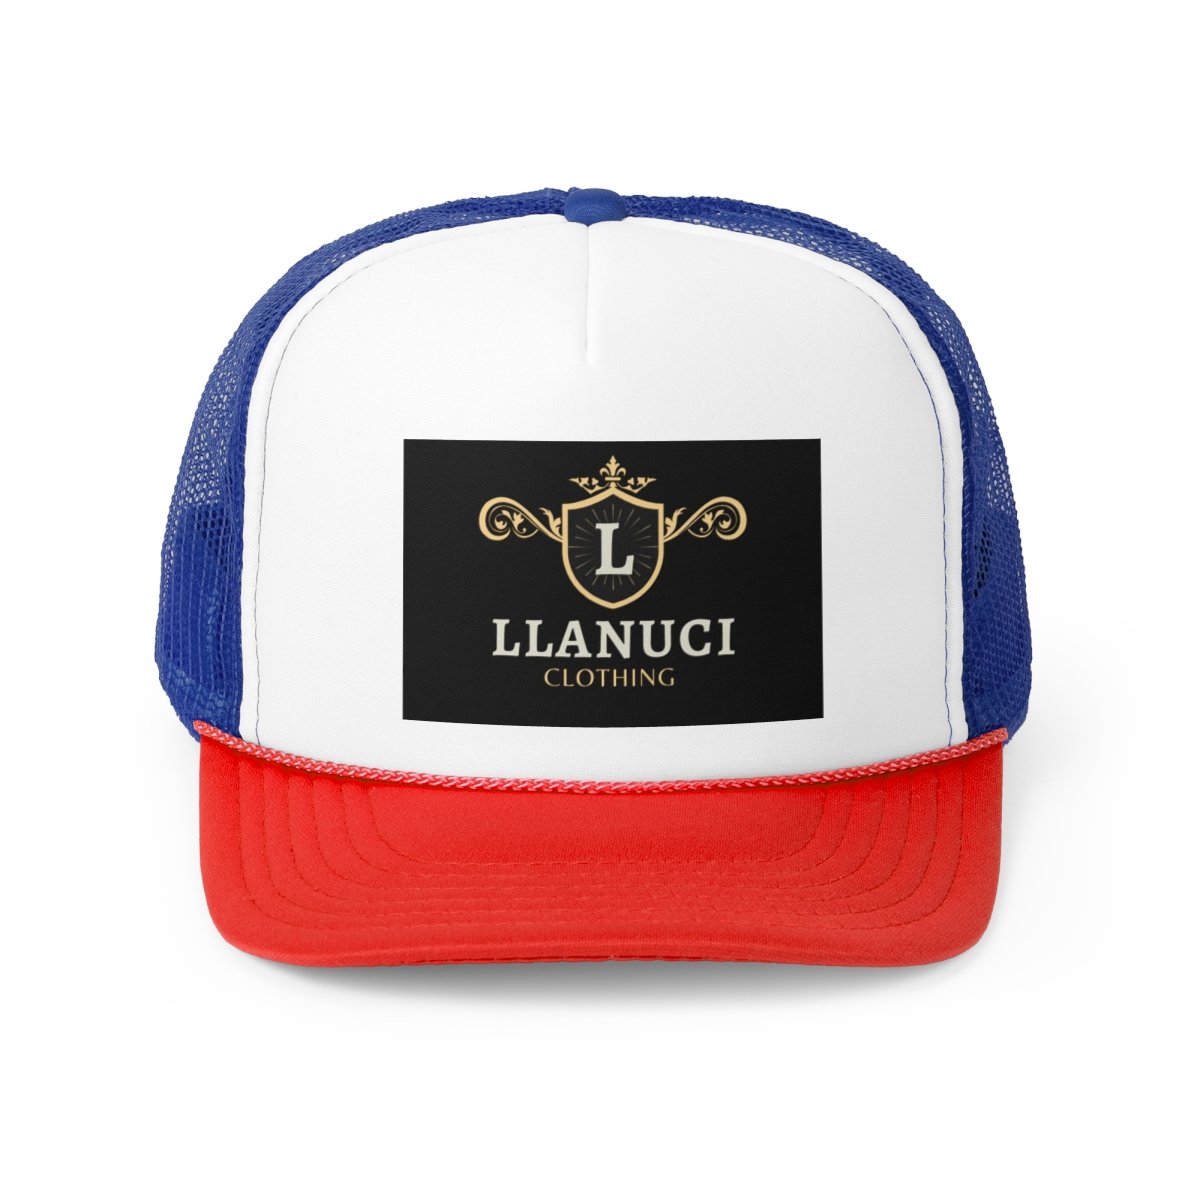 #Truckercaps and #buckethats available 🌞🌞 #Llanuciclothing 😁 #Blackownedbusiness 💪🏾 #Streetwear #Urbanclothing #Streetwearbrand #Fashion #clothingstore  #internationalshipping 🌍 #sneakerhead #fashionstyle llanuciclothing.com